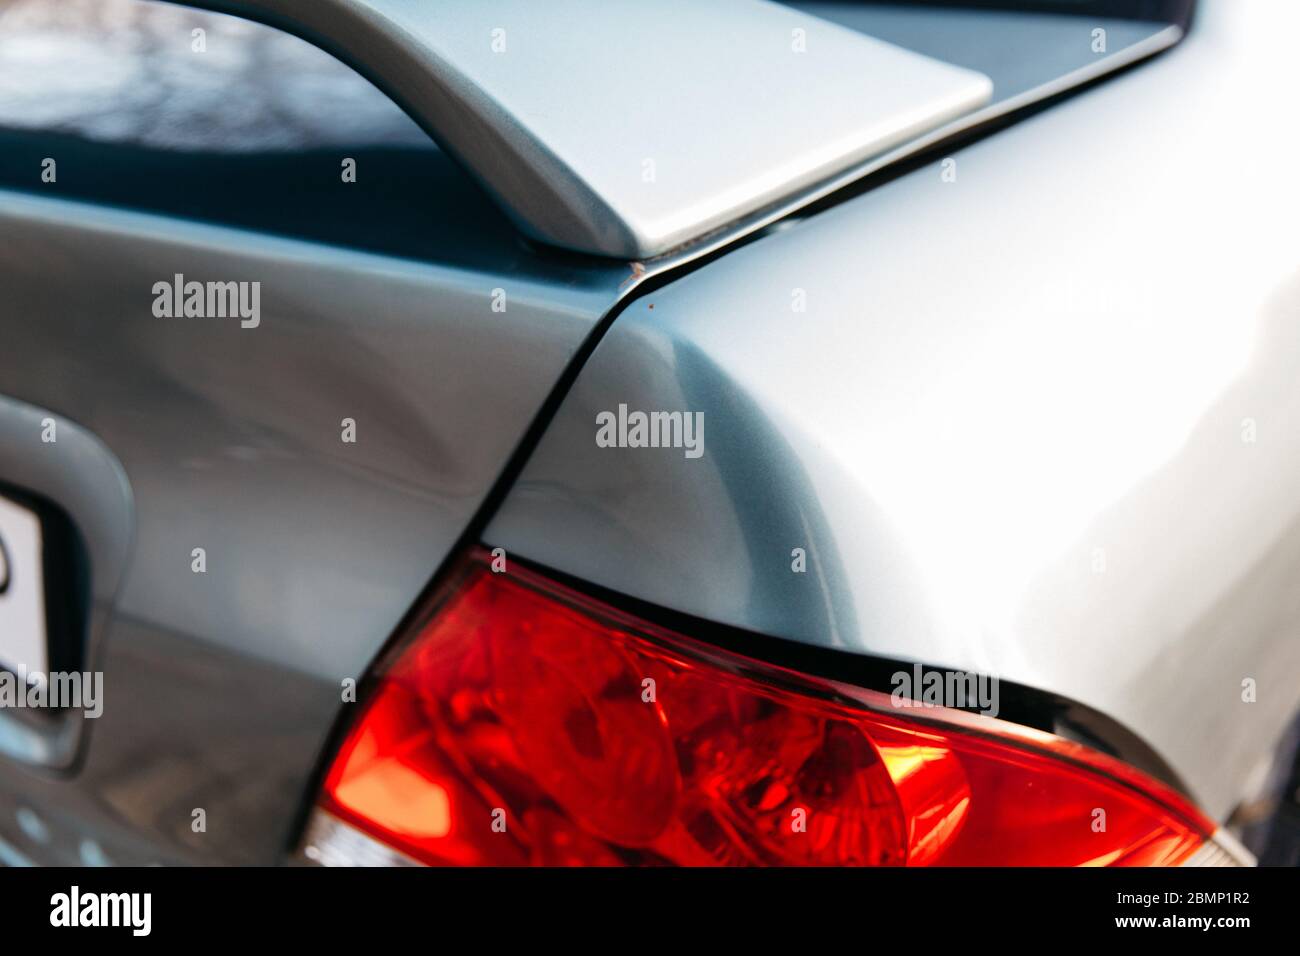 The taillight of a car is broken. Blue passenger car. Dent and scratch on the rear fender.Road accident. Stock Photo